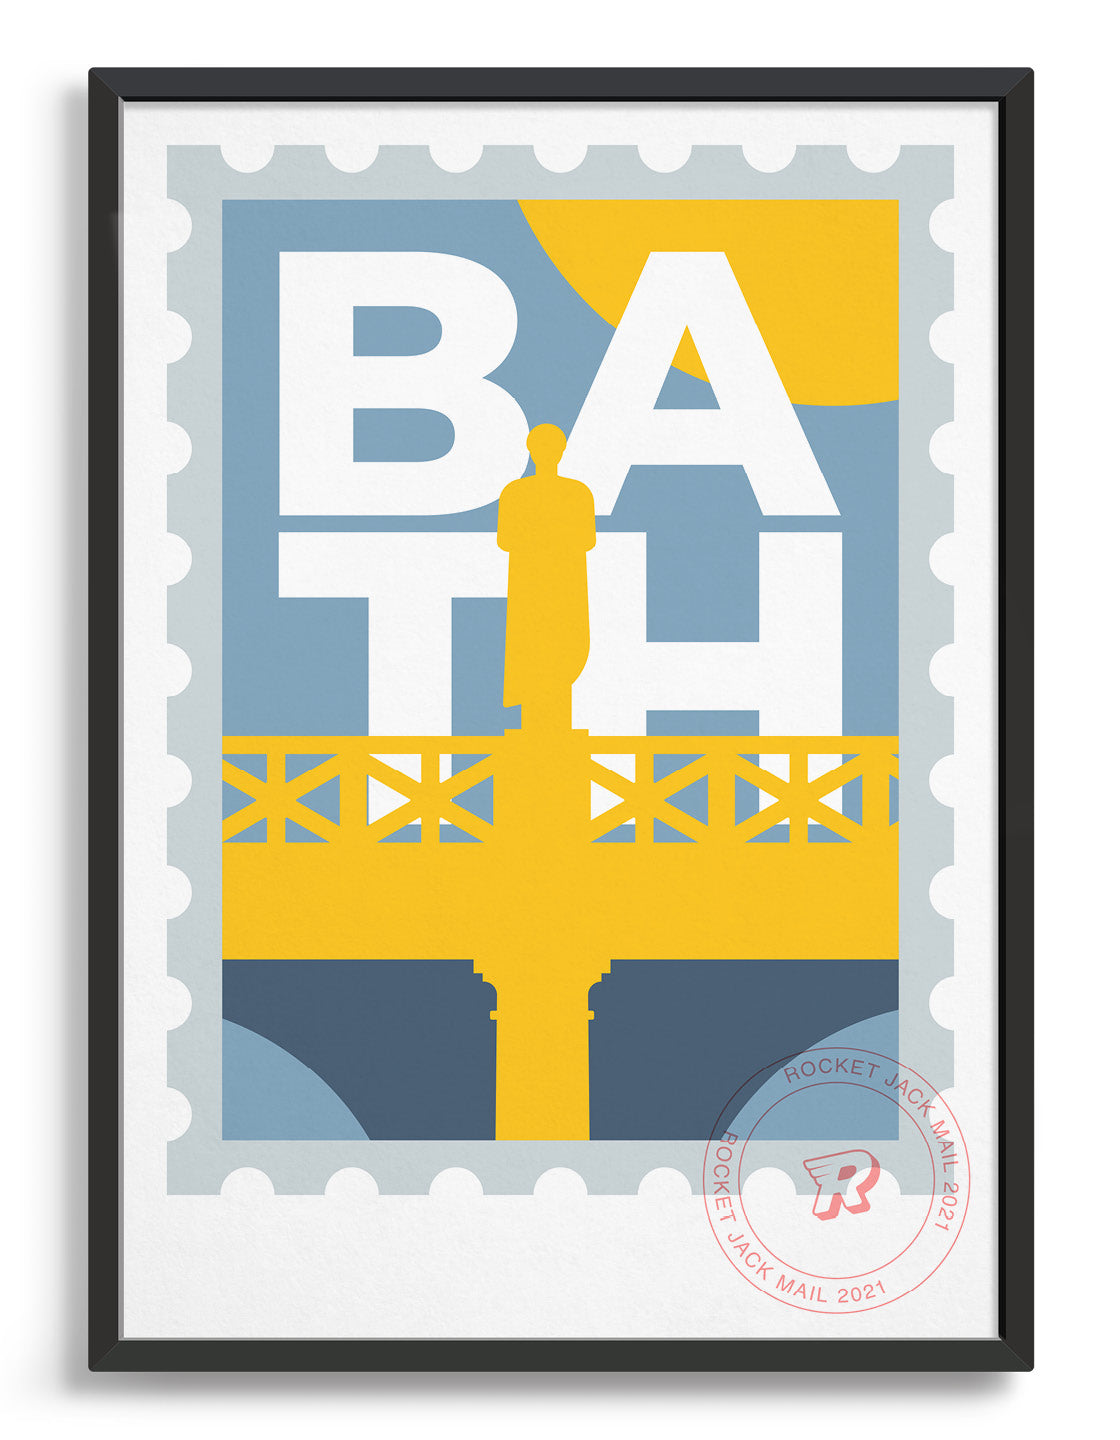 Customisable Bath stamp print featuring a roman statue against a grey & yellow background